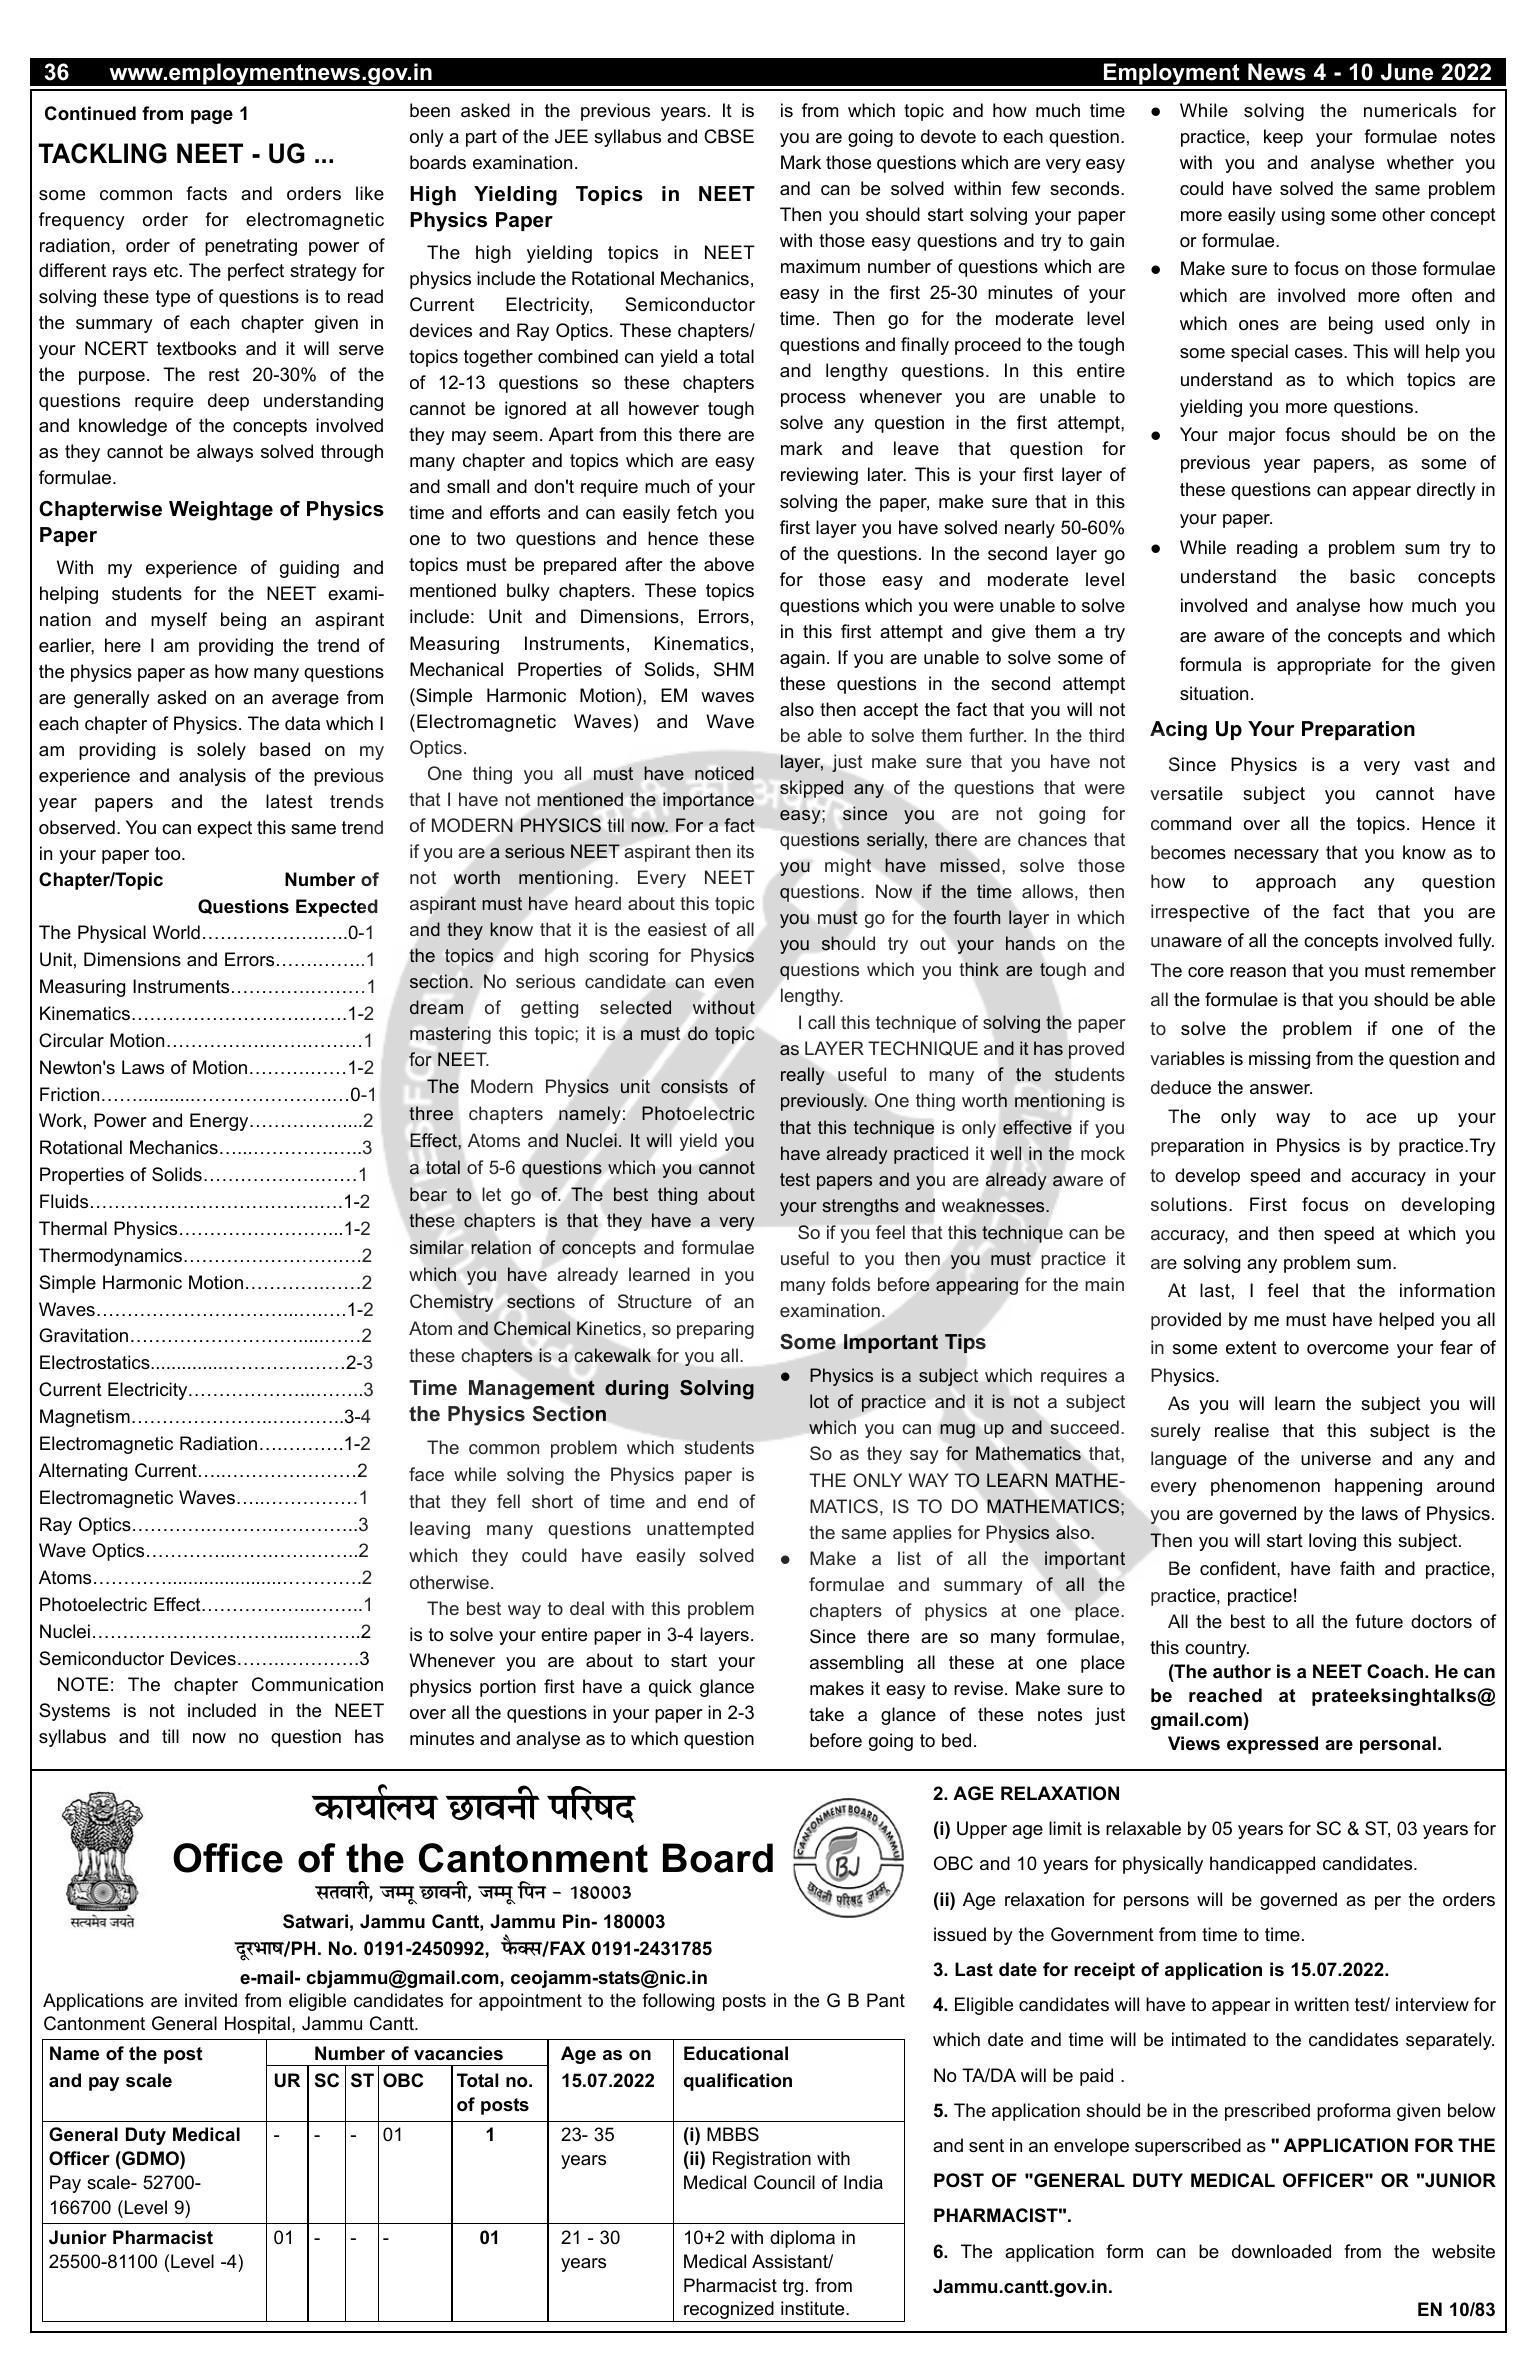 Cantonment Board Jammu General Duty Medical Officer (GDMO), Junior Pharmacist Recruitment 2022 - Page 1